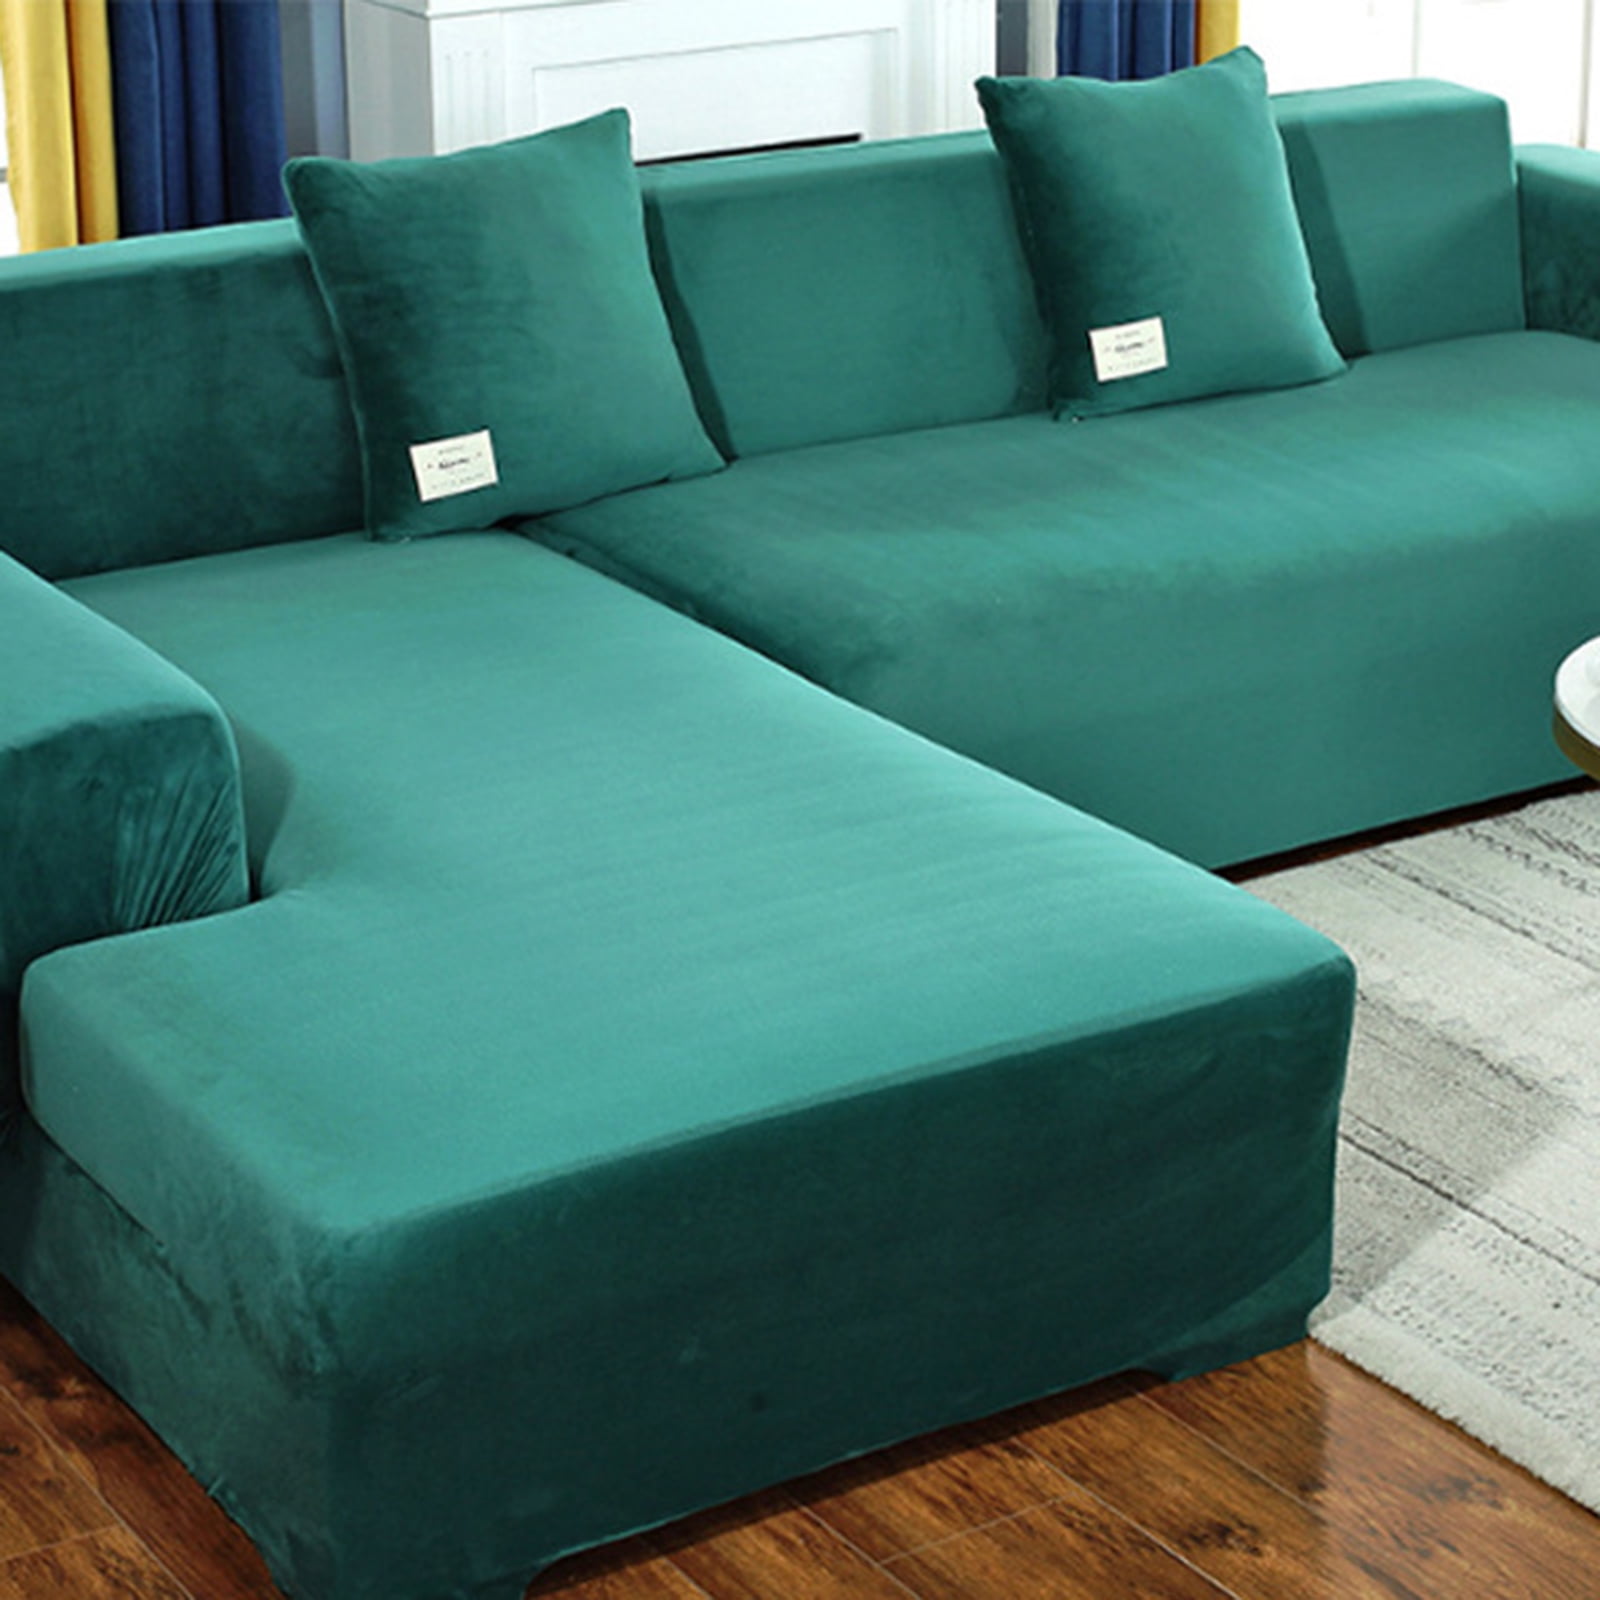 Details about   1~4 Seater Stretch Sofa Seat Cushion Cover Couch L Shape Seat Protect Slipcover 